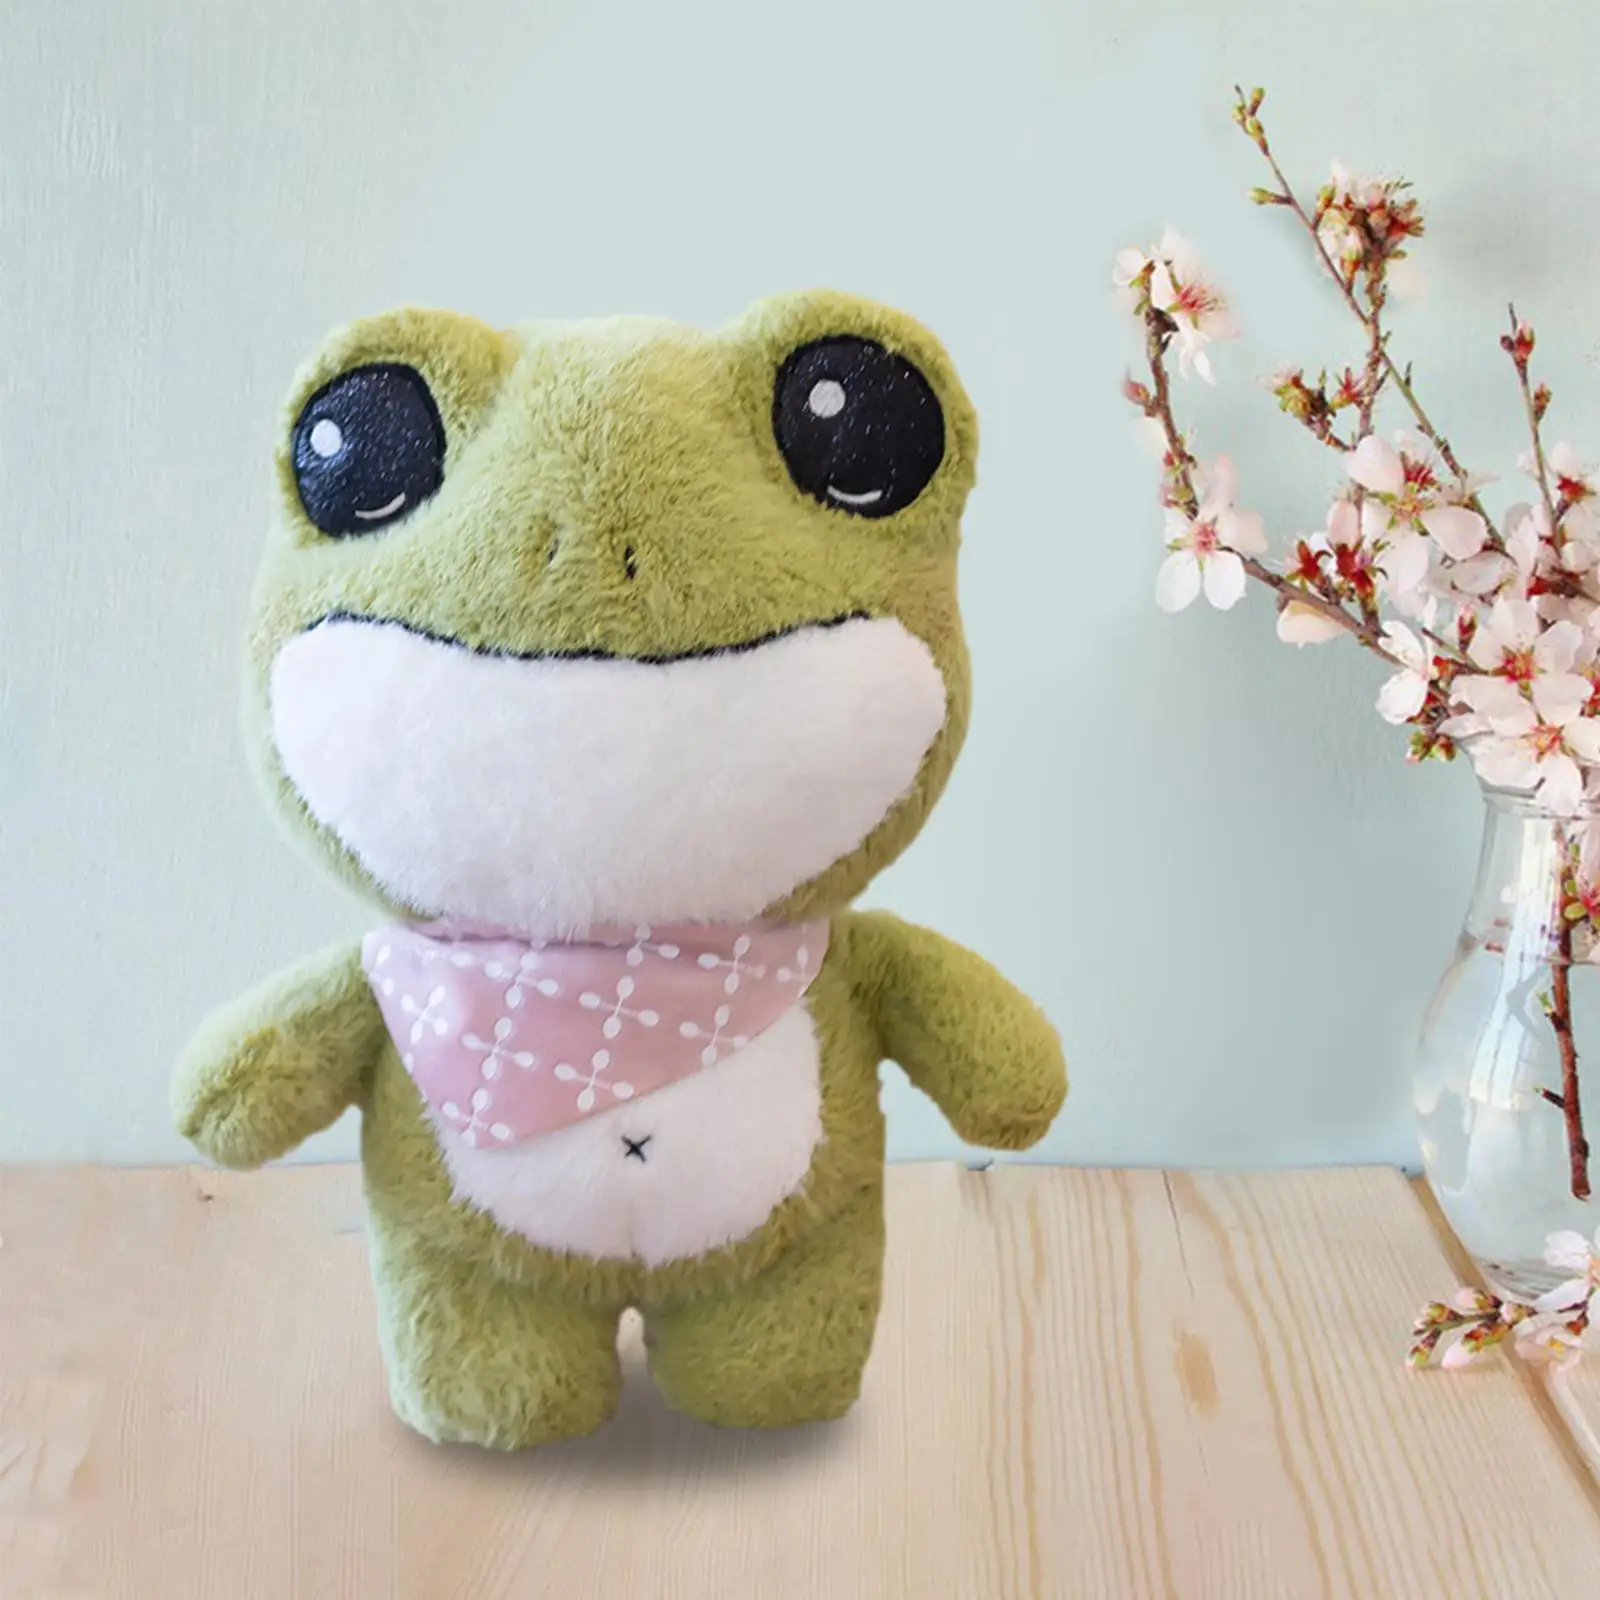 Adorable Frog Plush Toy Soft Green Frog Doll Home Decoration 30cm with Clothes